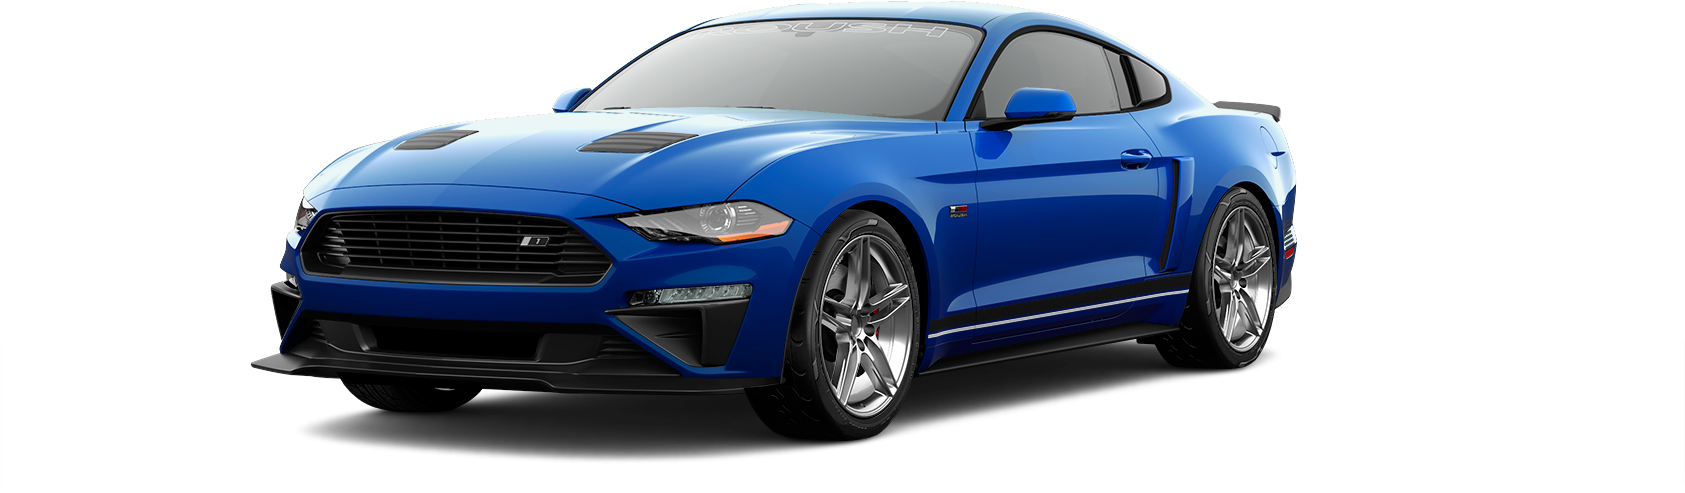 2018 Roush Stage 1 Mustang - Ford Mustang (1684x824), Png Download